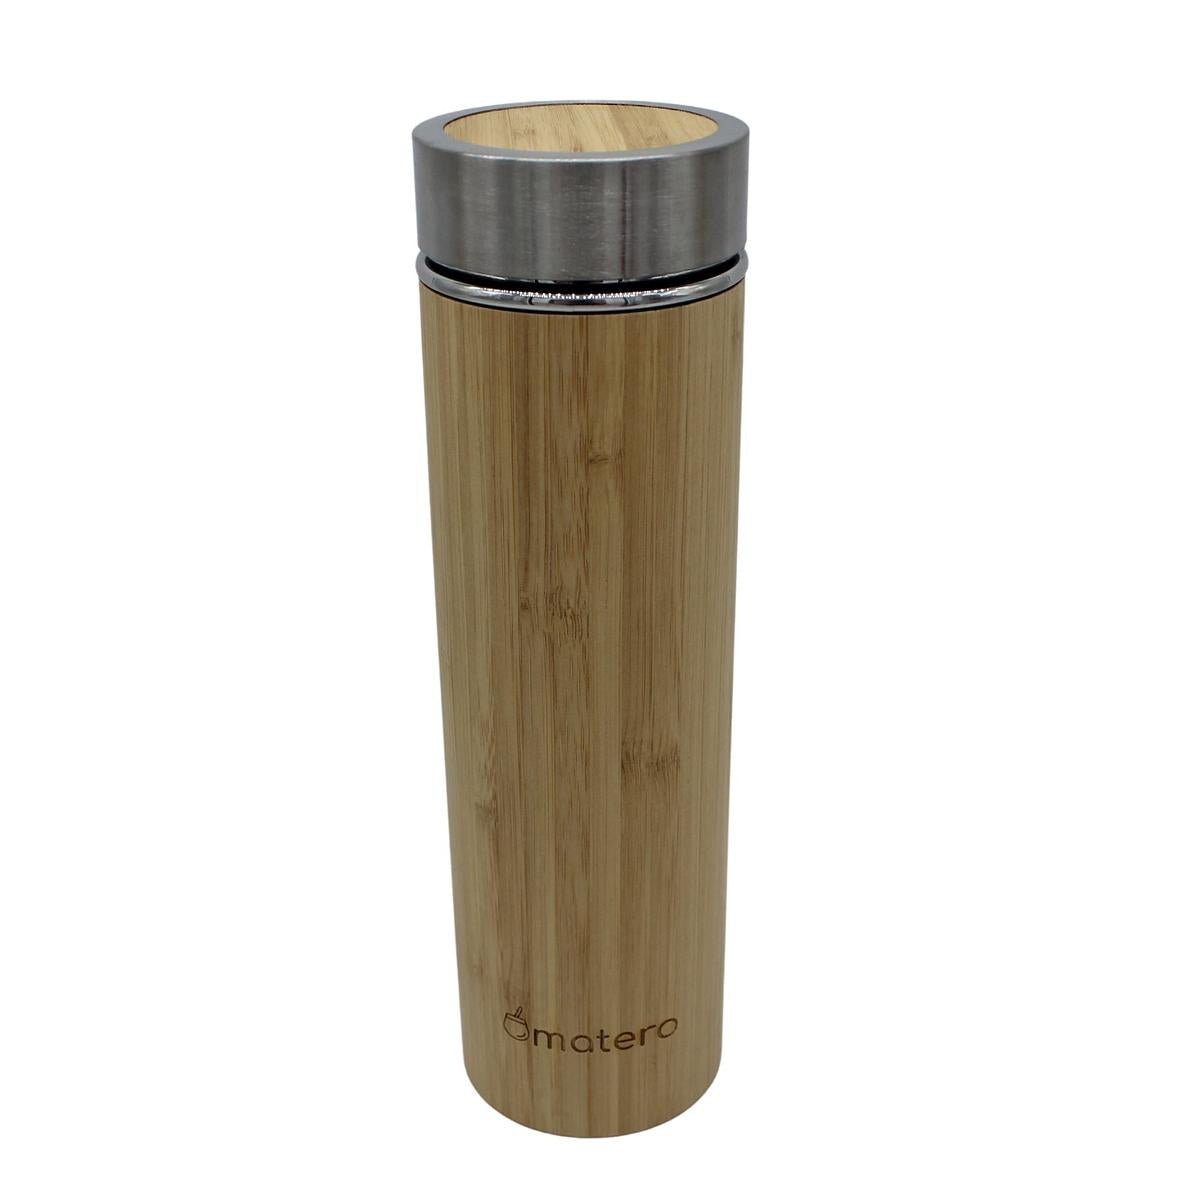 Stainless-Steel Portable Thermos with Bamboo Exterior by Matero